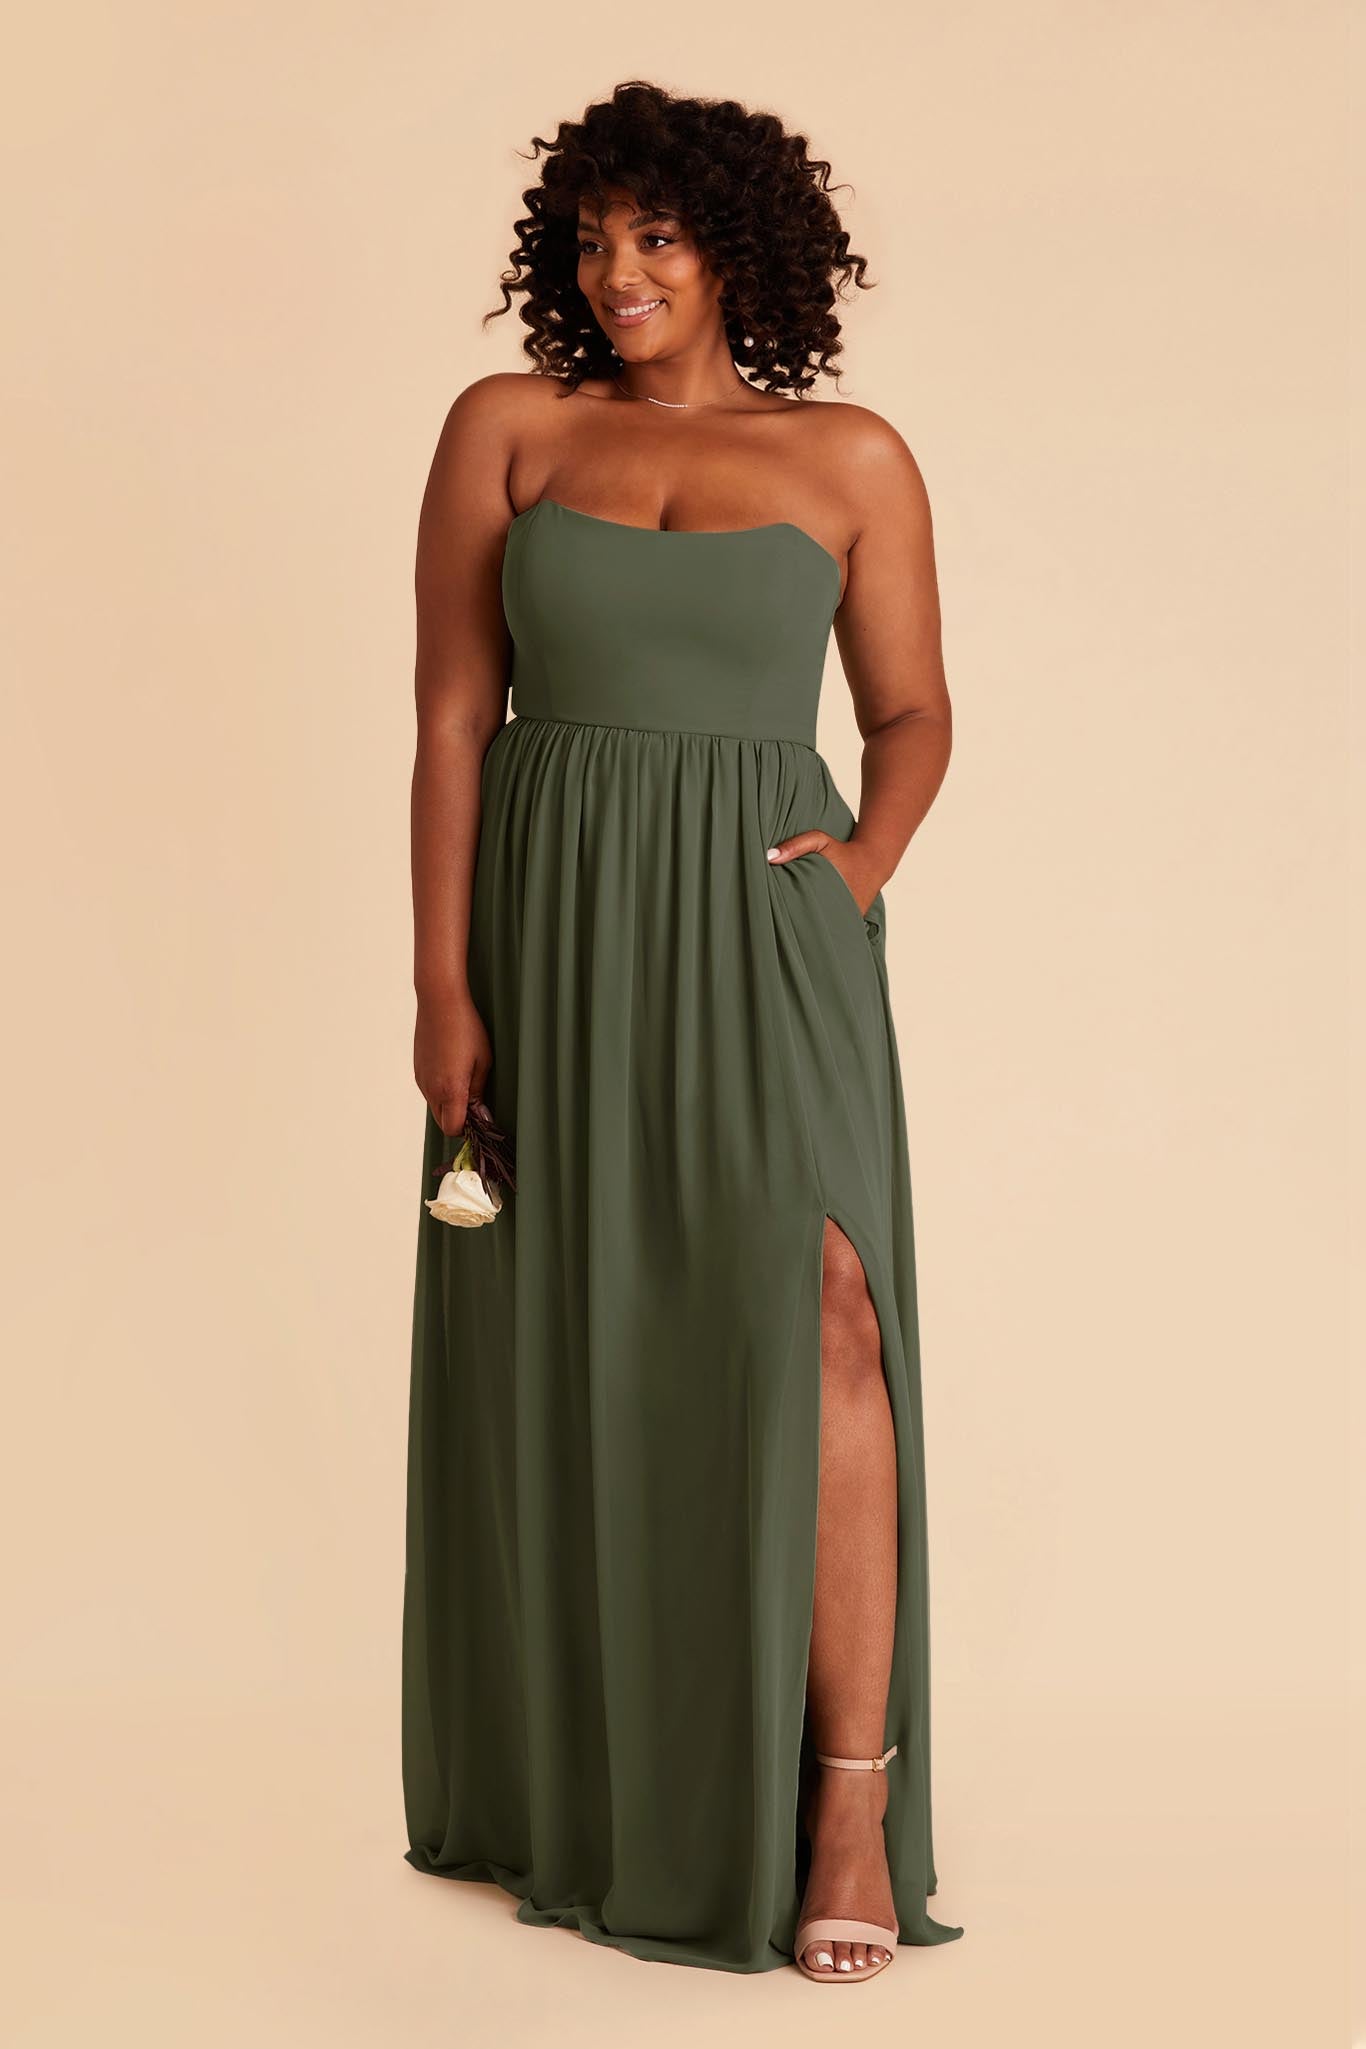 August Convertible Dress - Olive